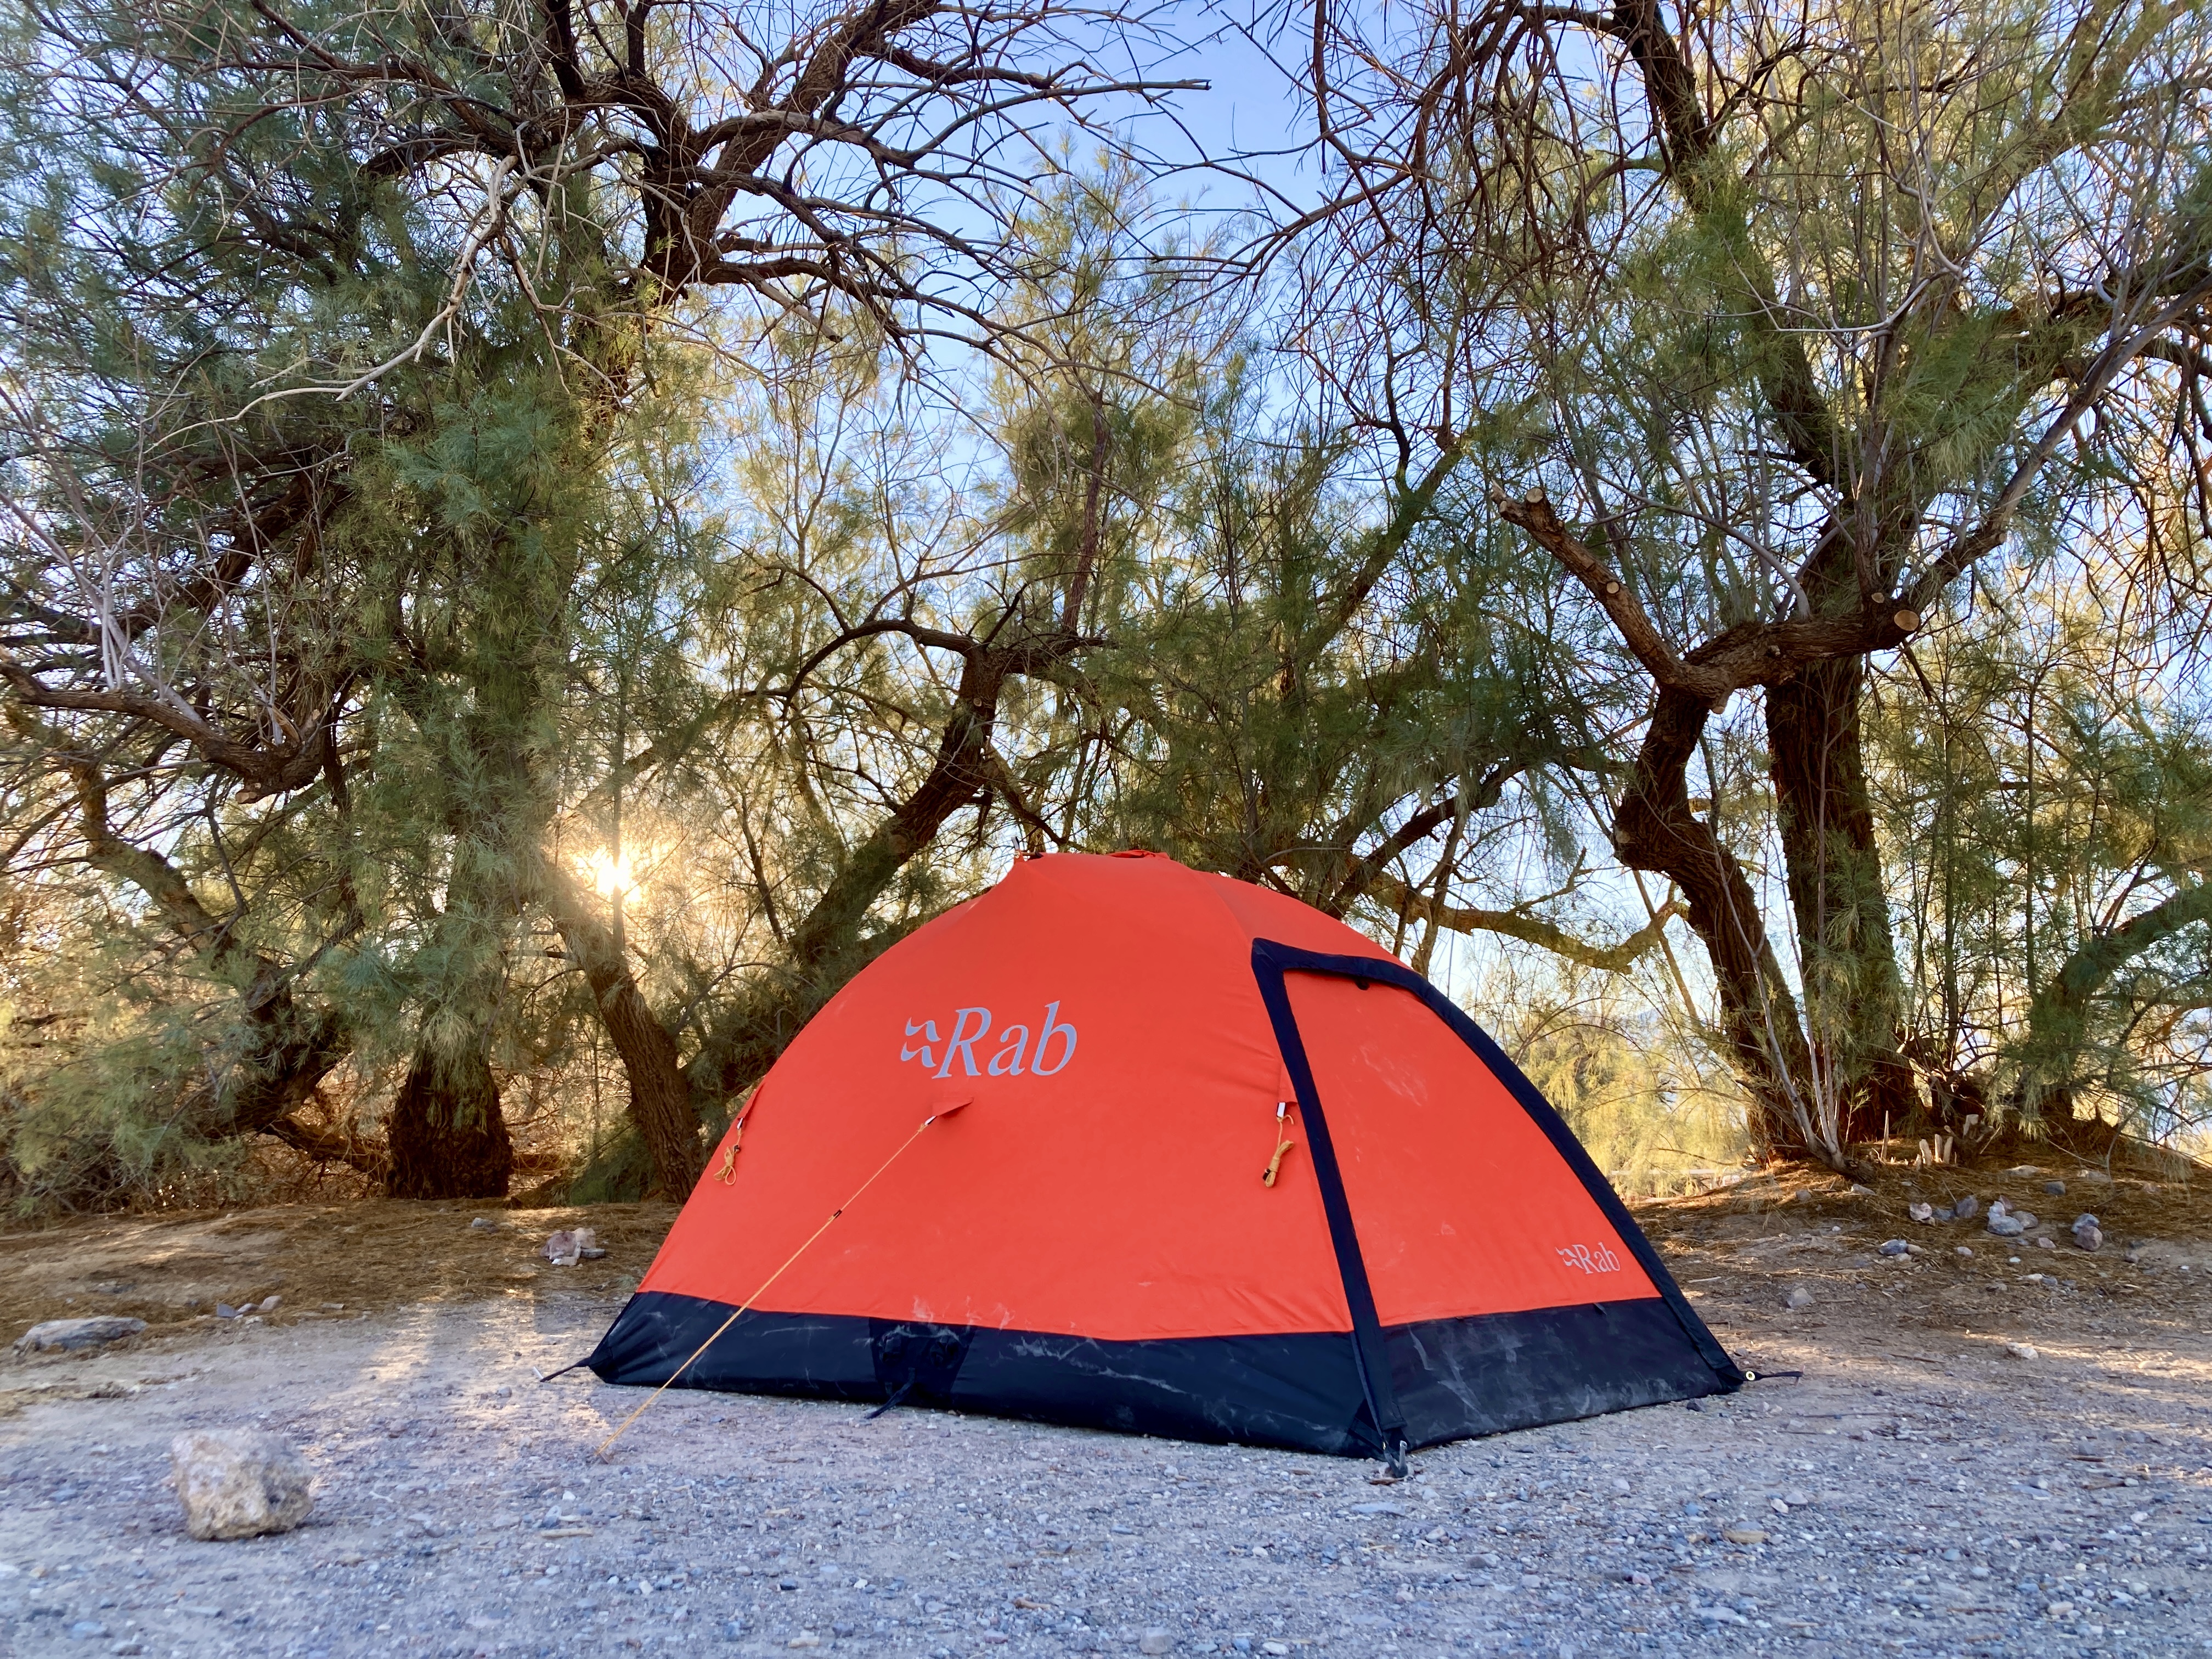 The Rab Latok Mountain 2 Tent at Furnace Creek Campground in Death Valley National Park.